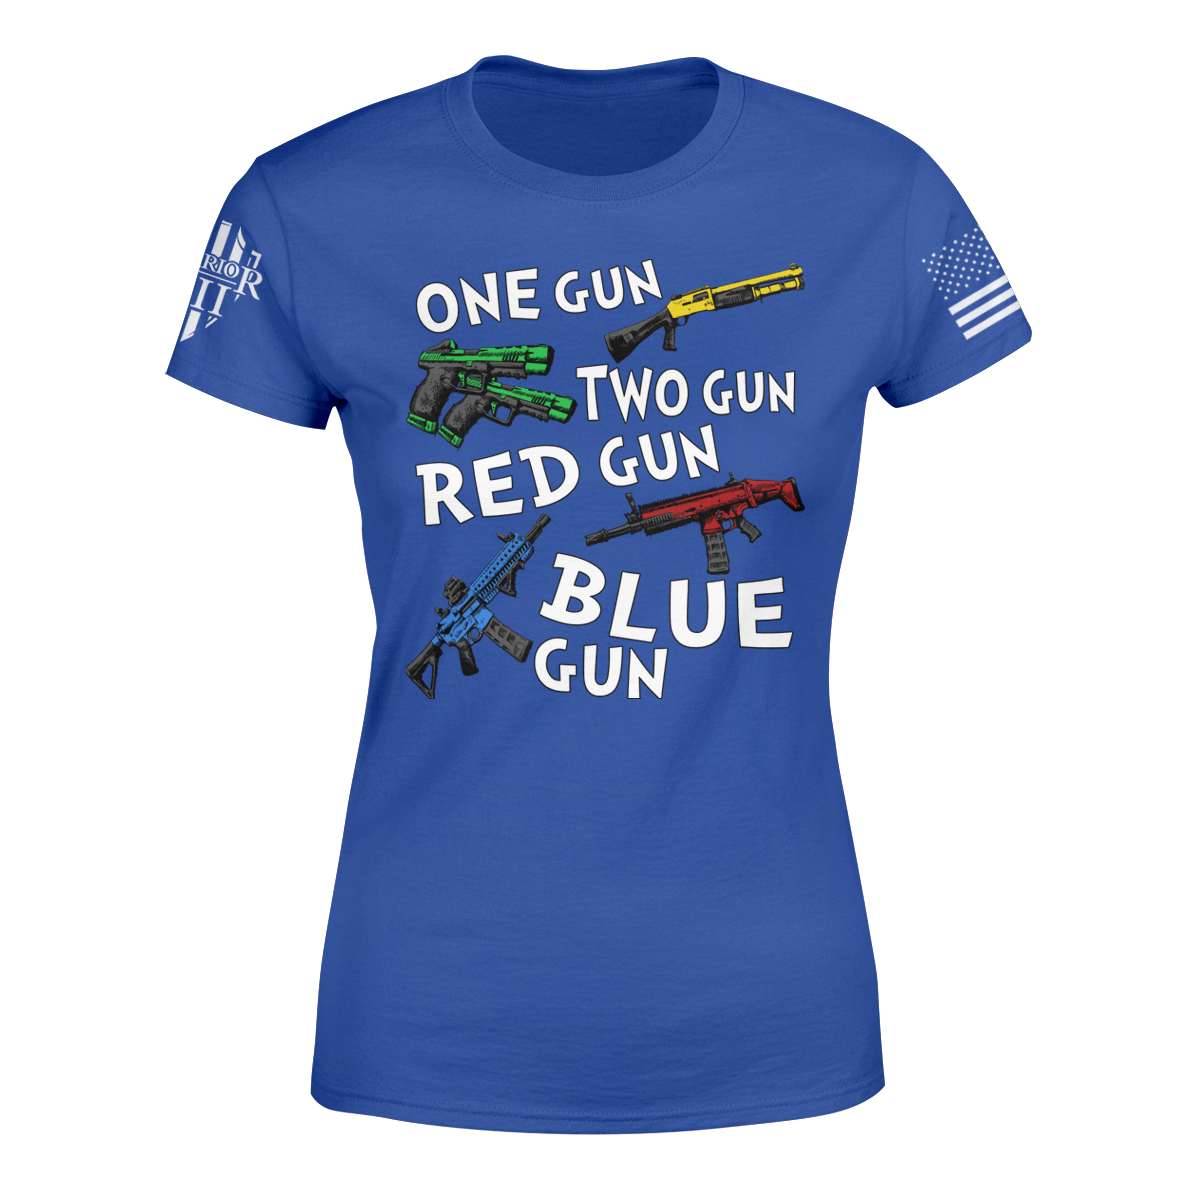 A blue women's relaxed fit shirt with the words "One gun, two gun, red gun blue gun" with colored guns printed on the front.